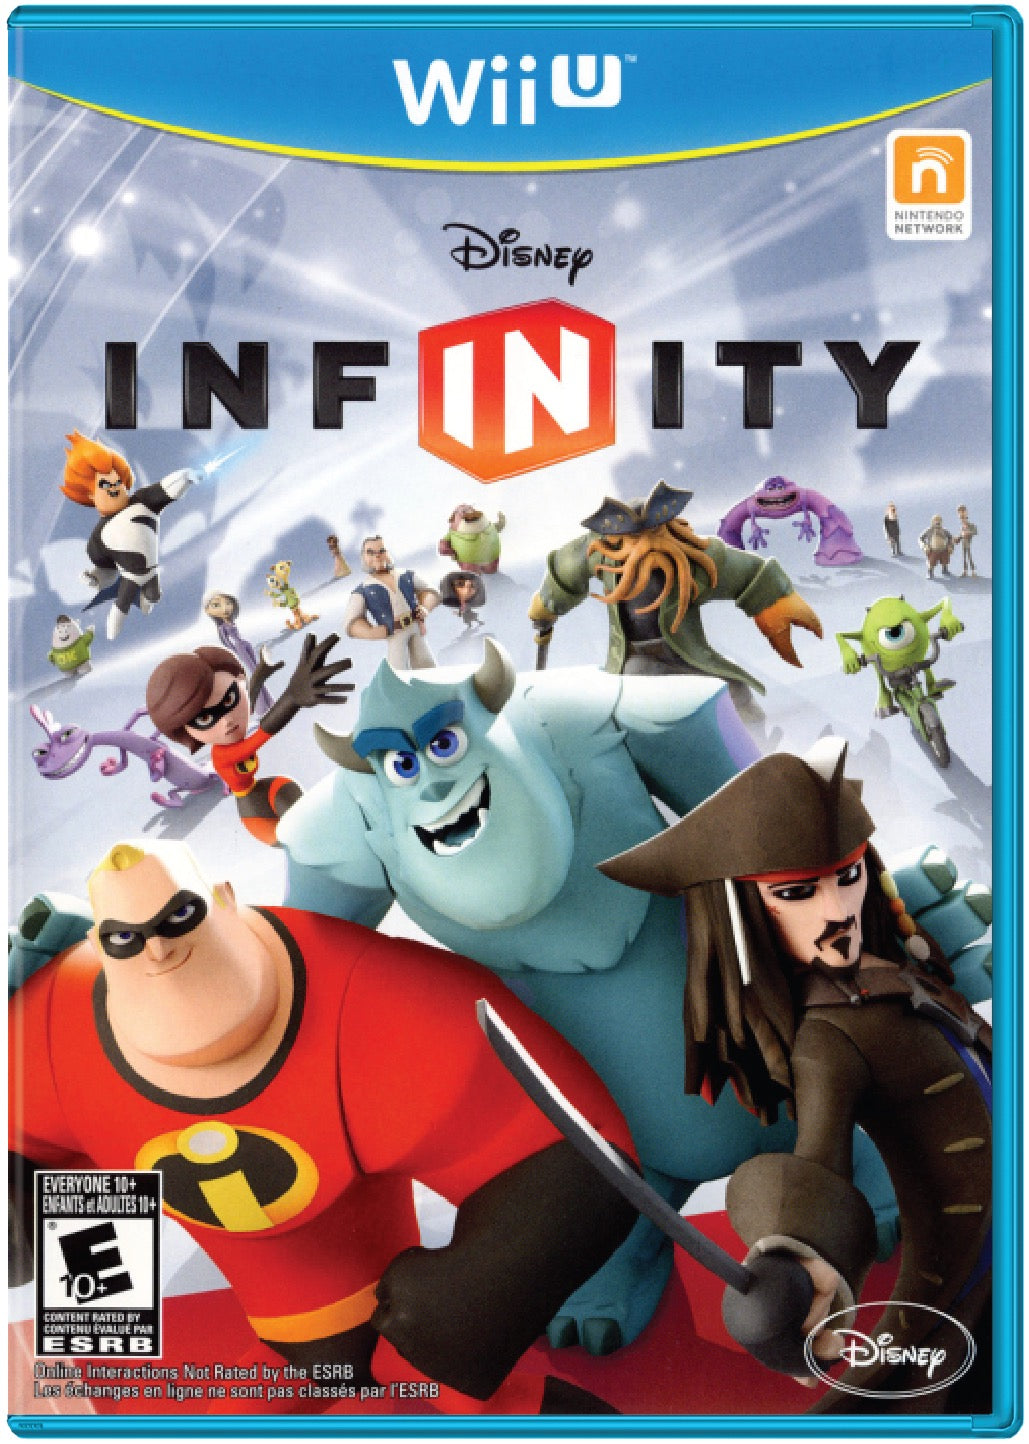 Disney Infinity Cover Art and Product Photo